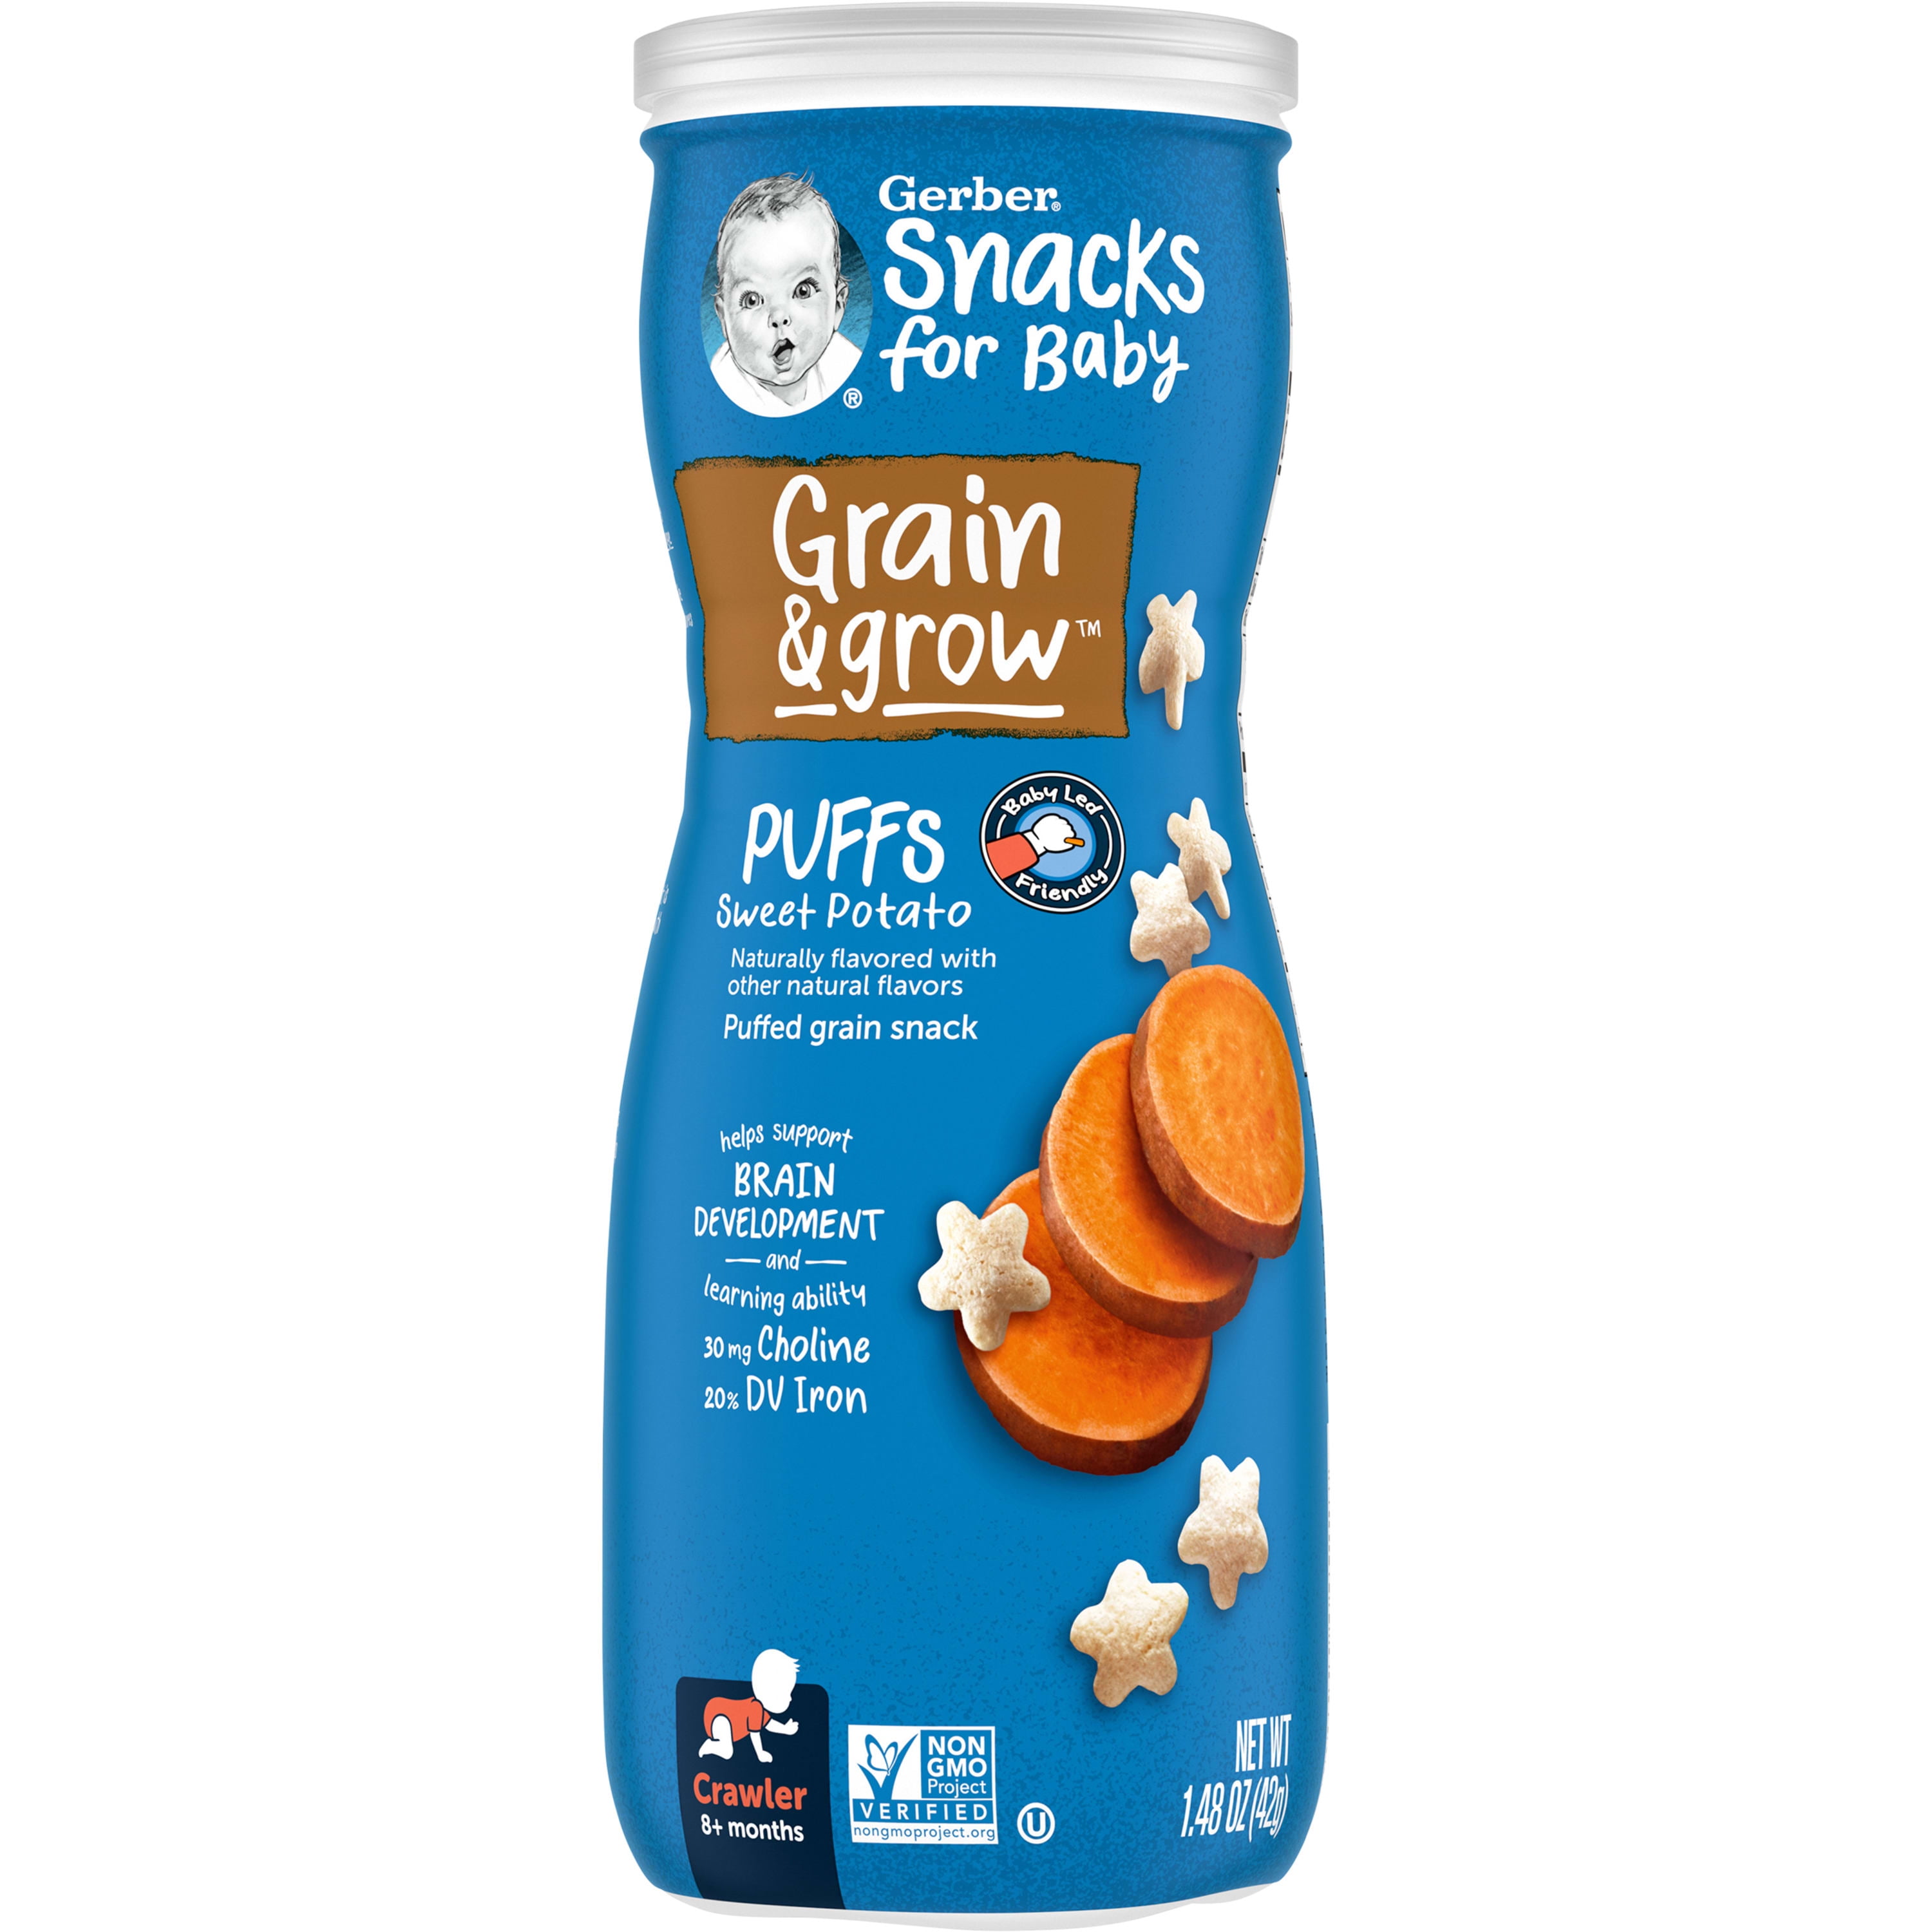 Gerber Snacks for Baby Grain & Grow Puffs, Sweet Potato, 1.48 oz  Canister 